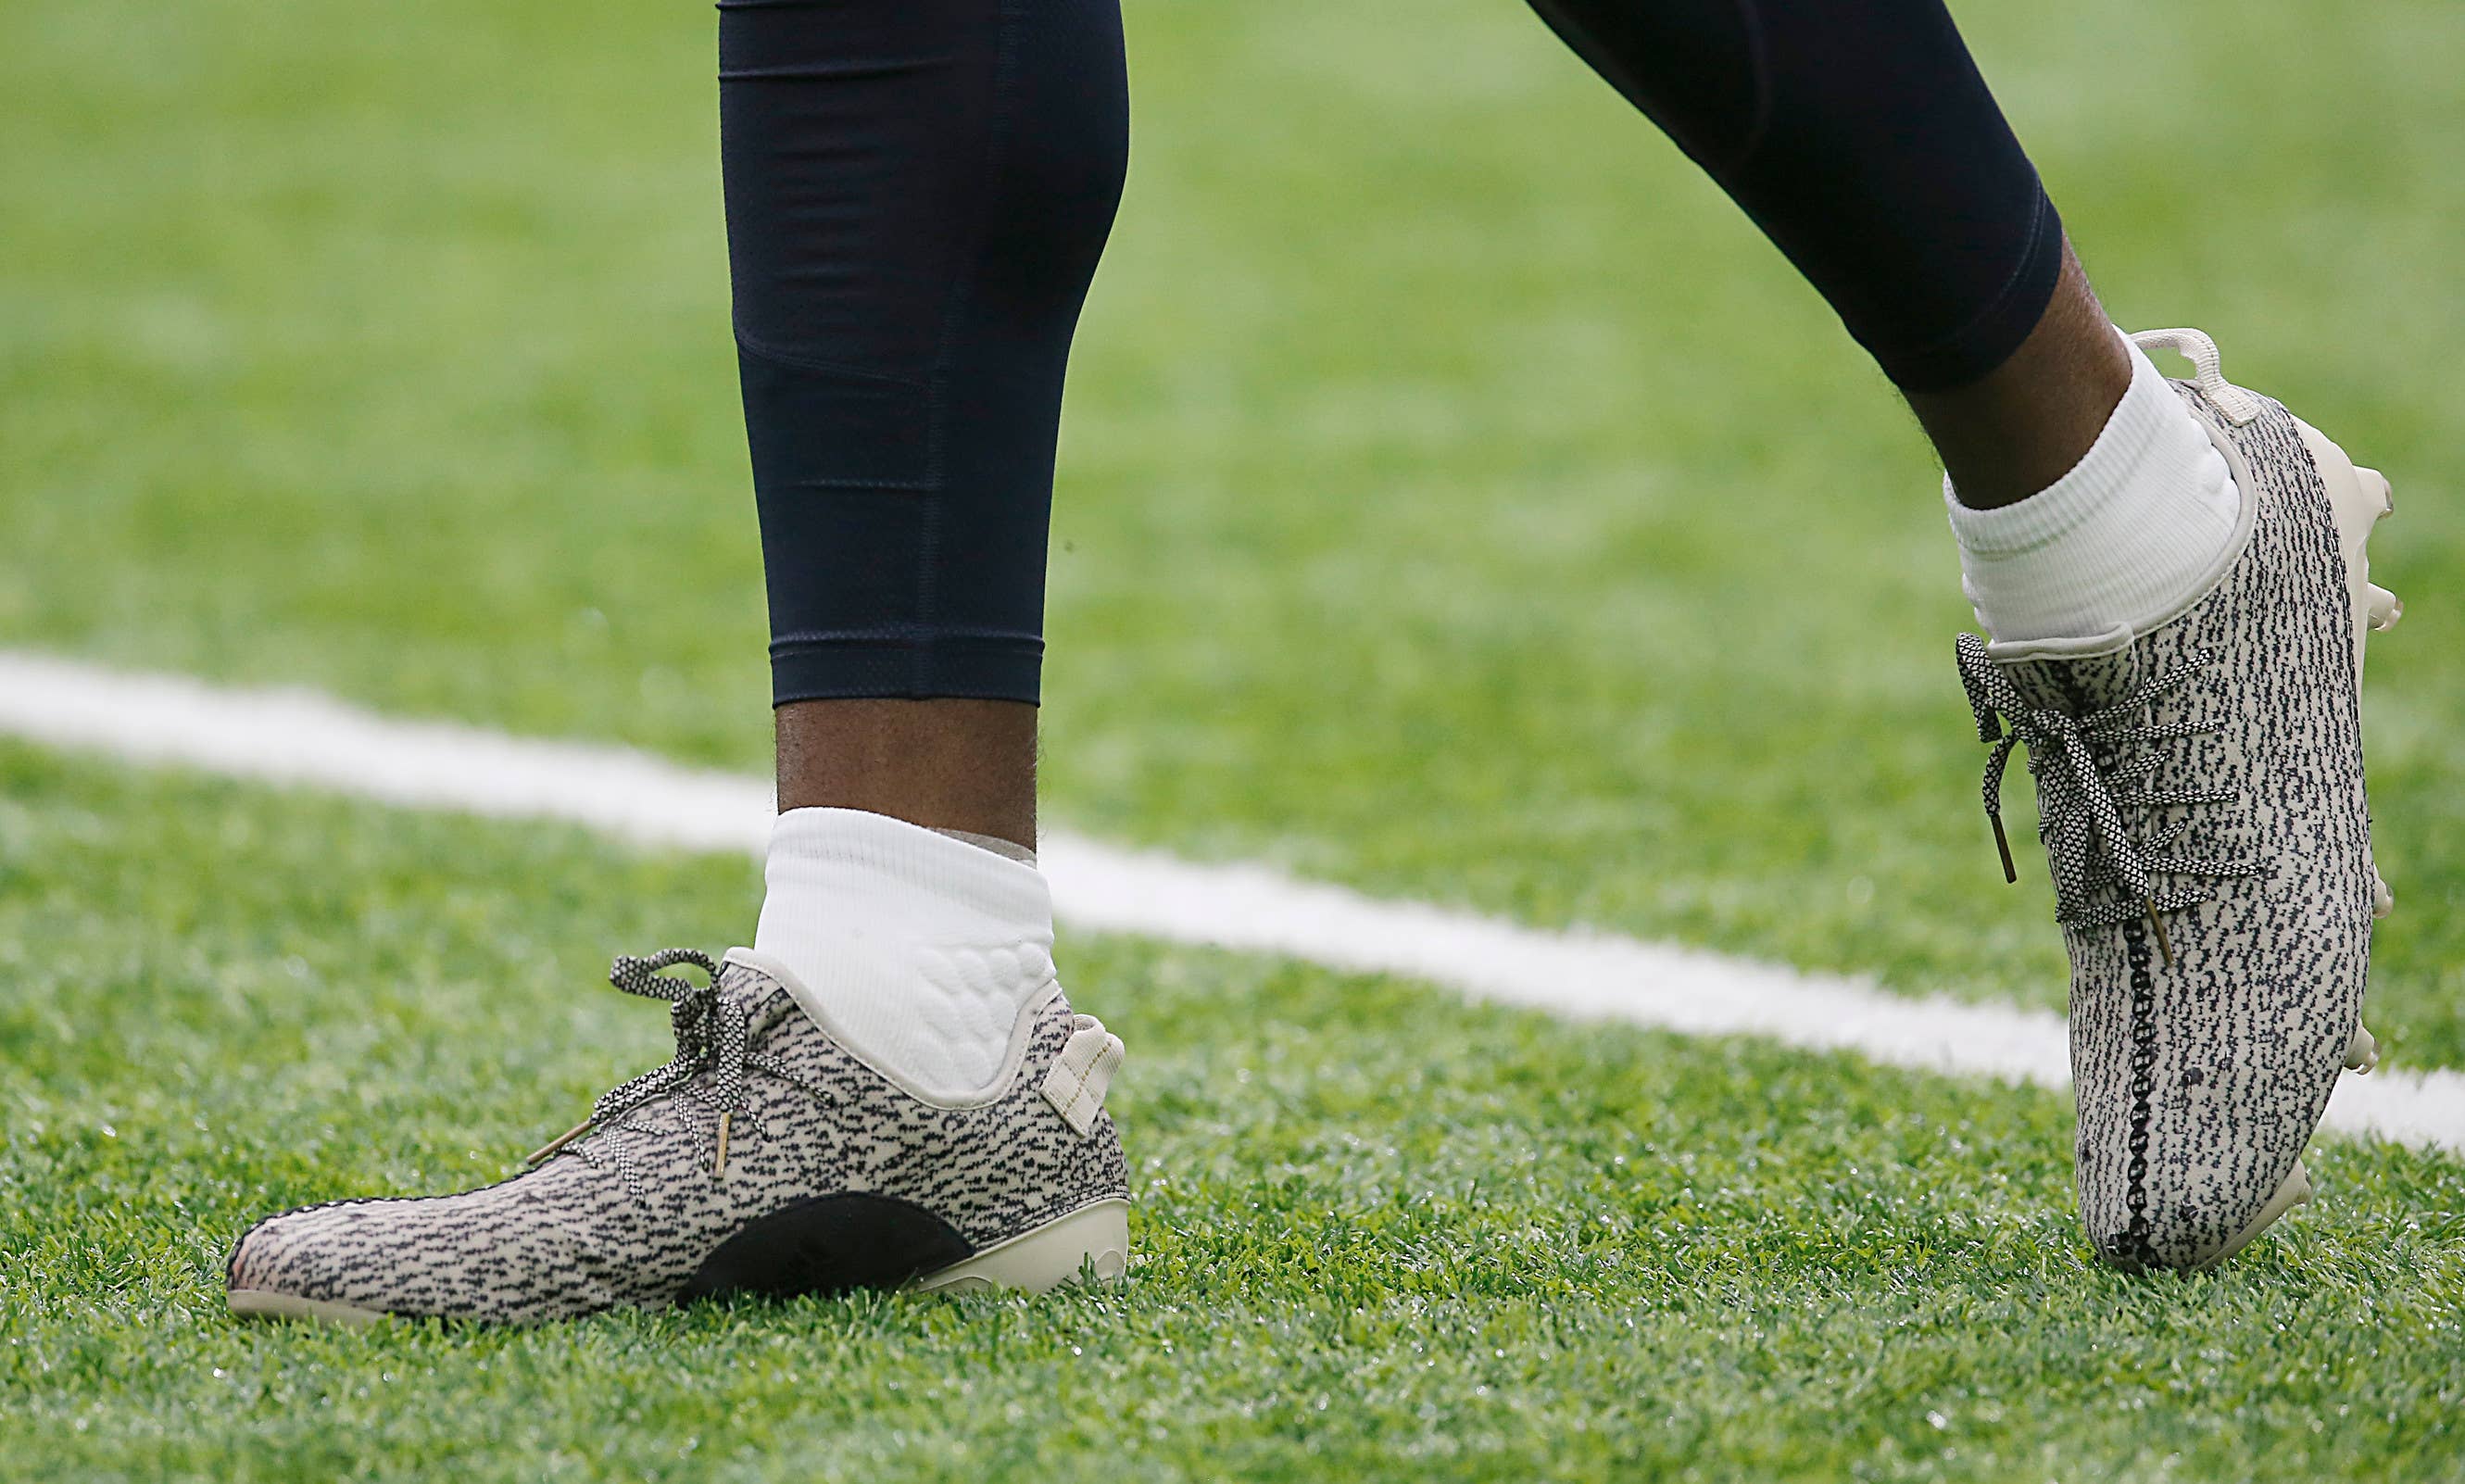 The Banned Kanye West's Yeezy Cleats Complex